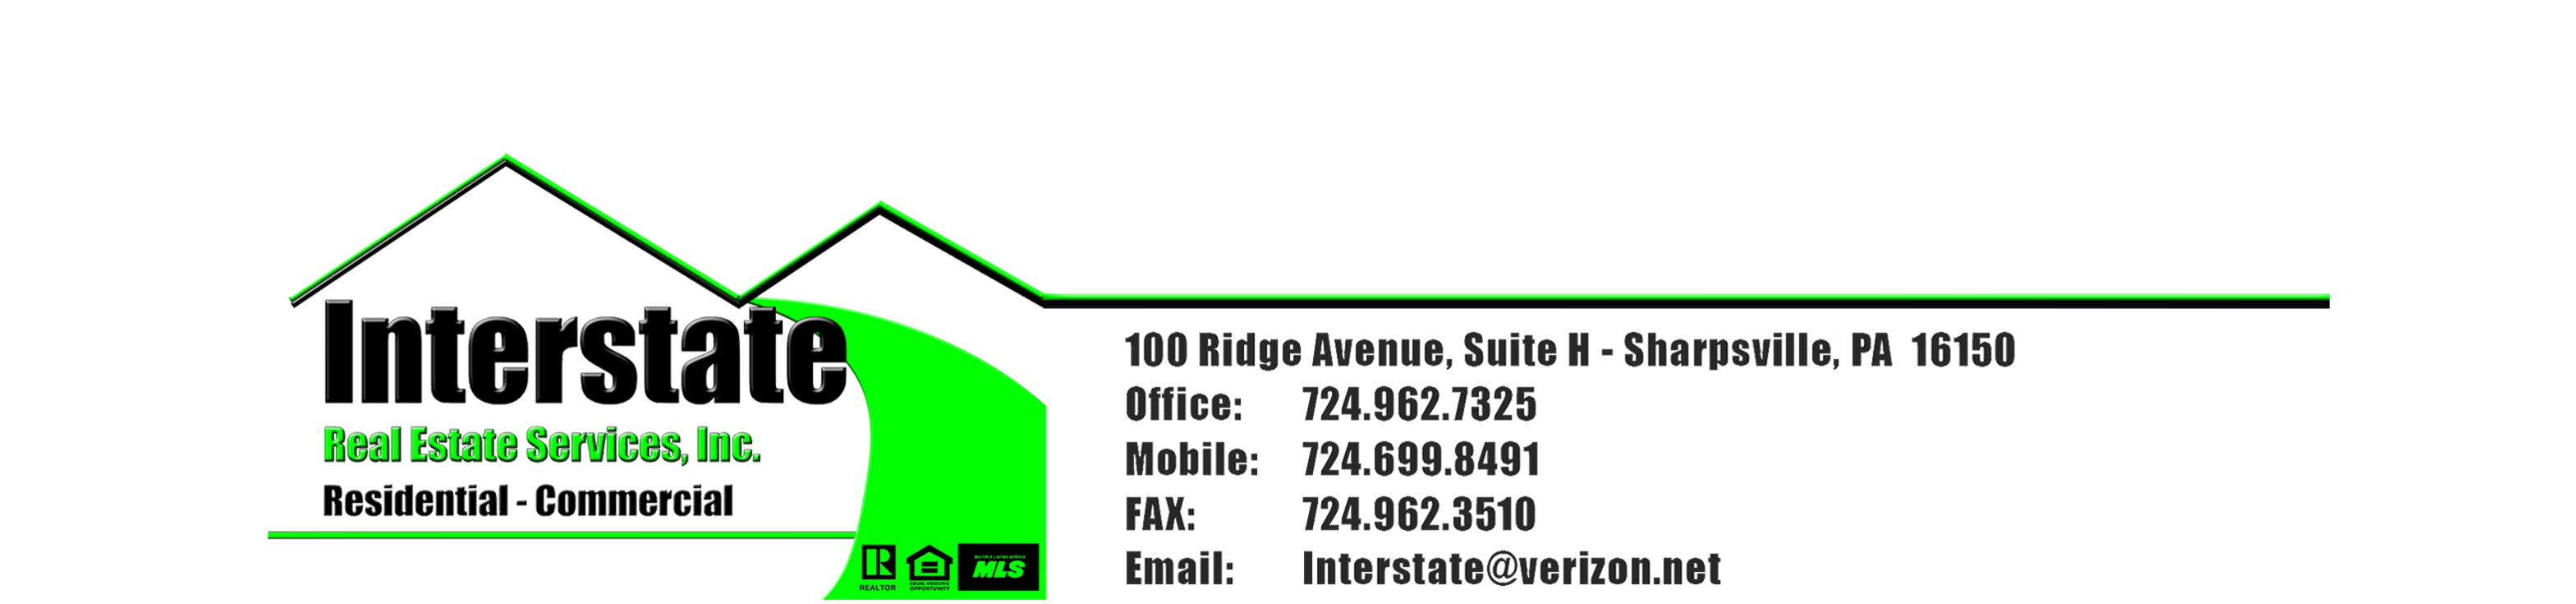 Interstate Real Estate Services, Inc.